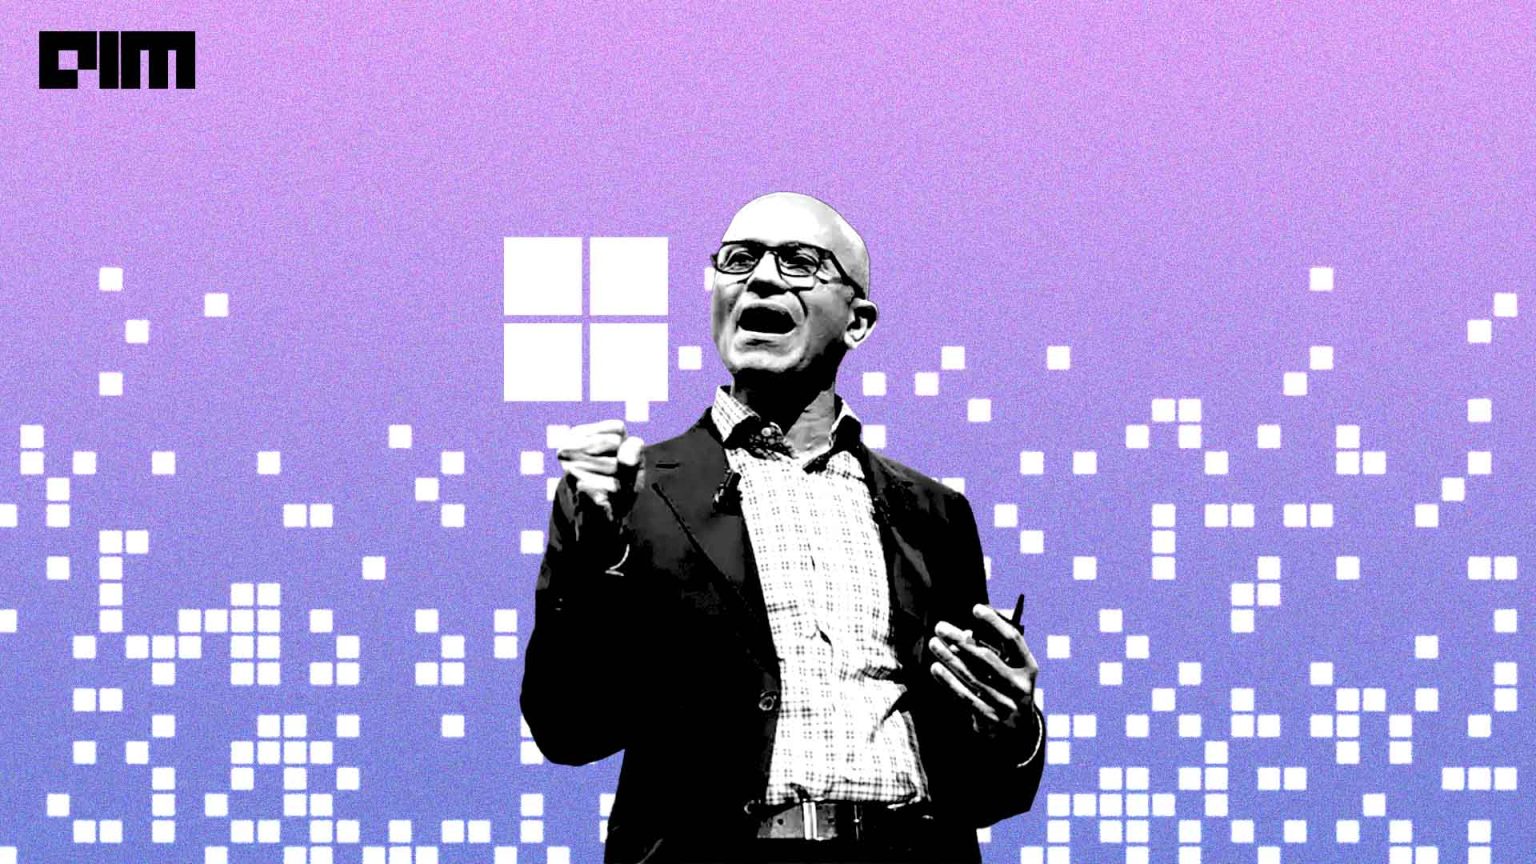 Microsoft is Hell Bent on Bringing AI to Windows